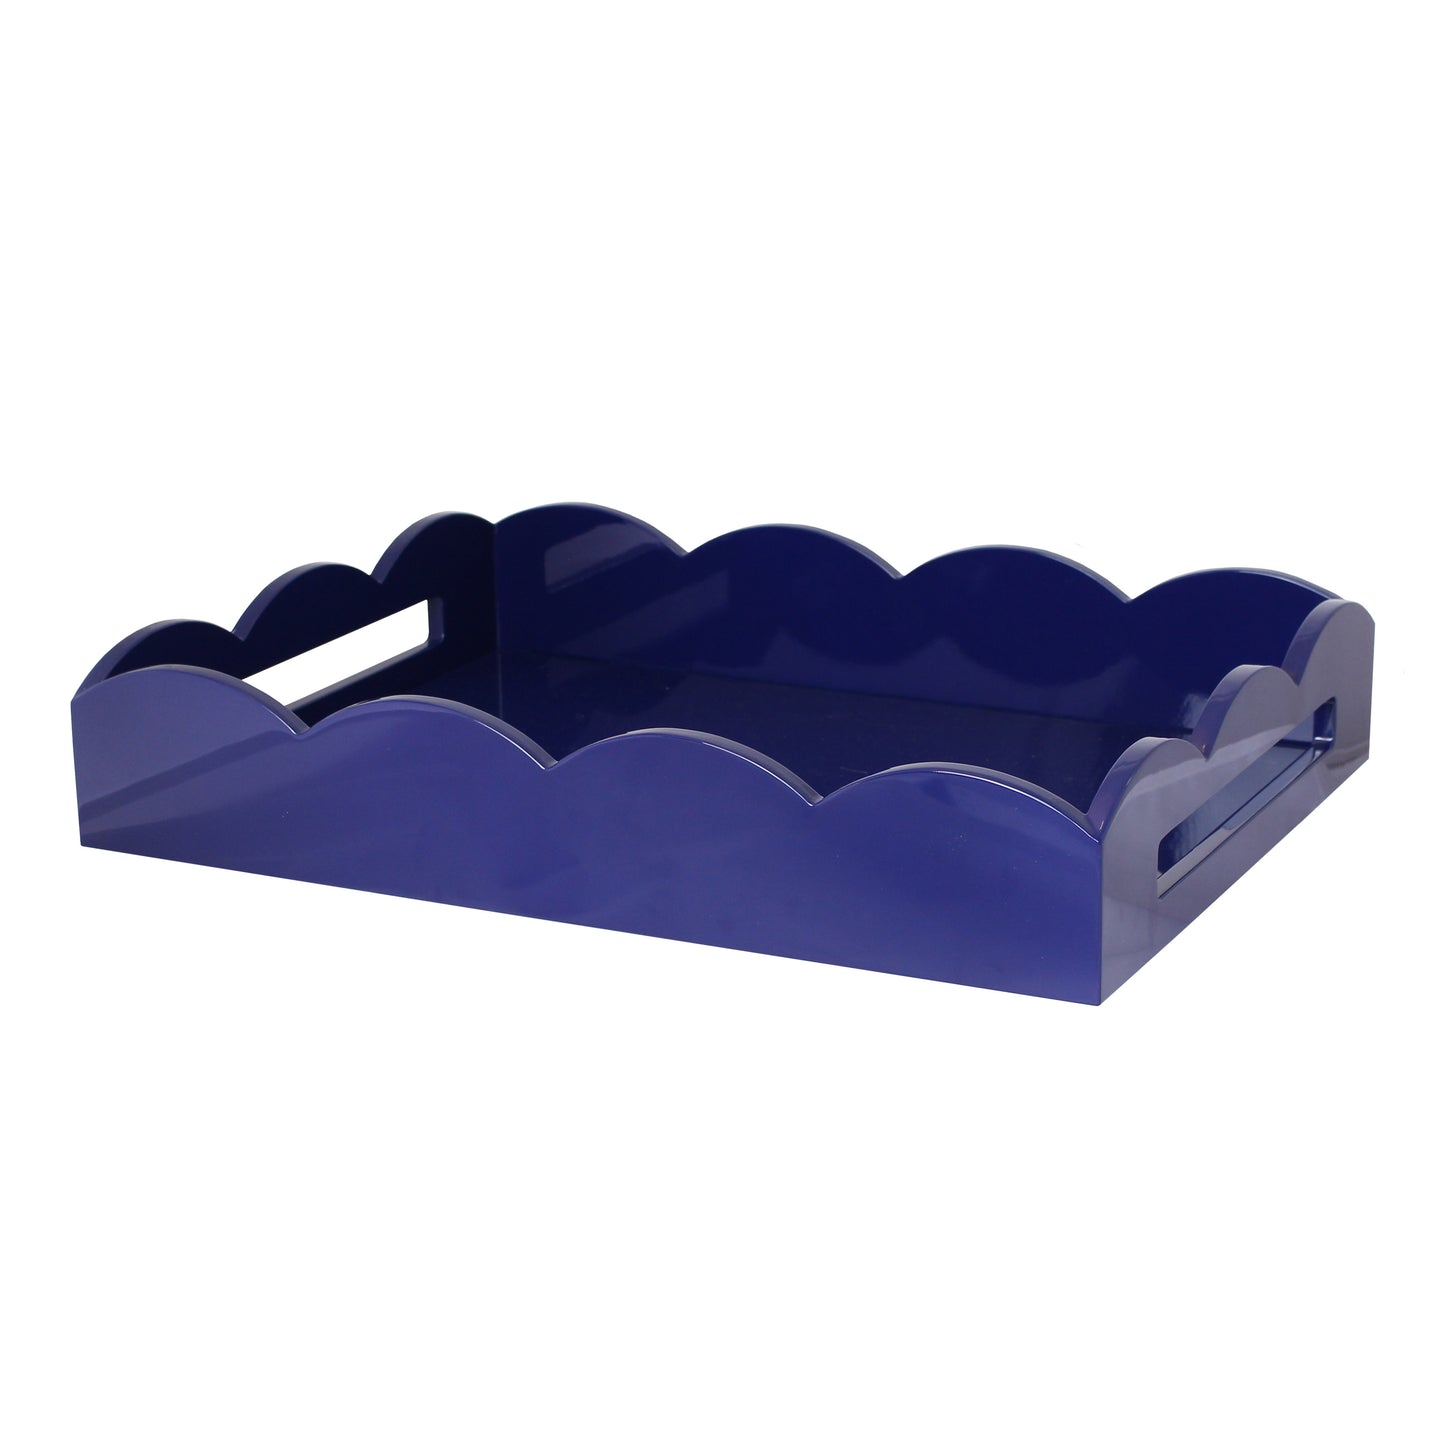 Navy blue lacquer tray with a scalloped edge